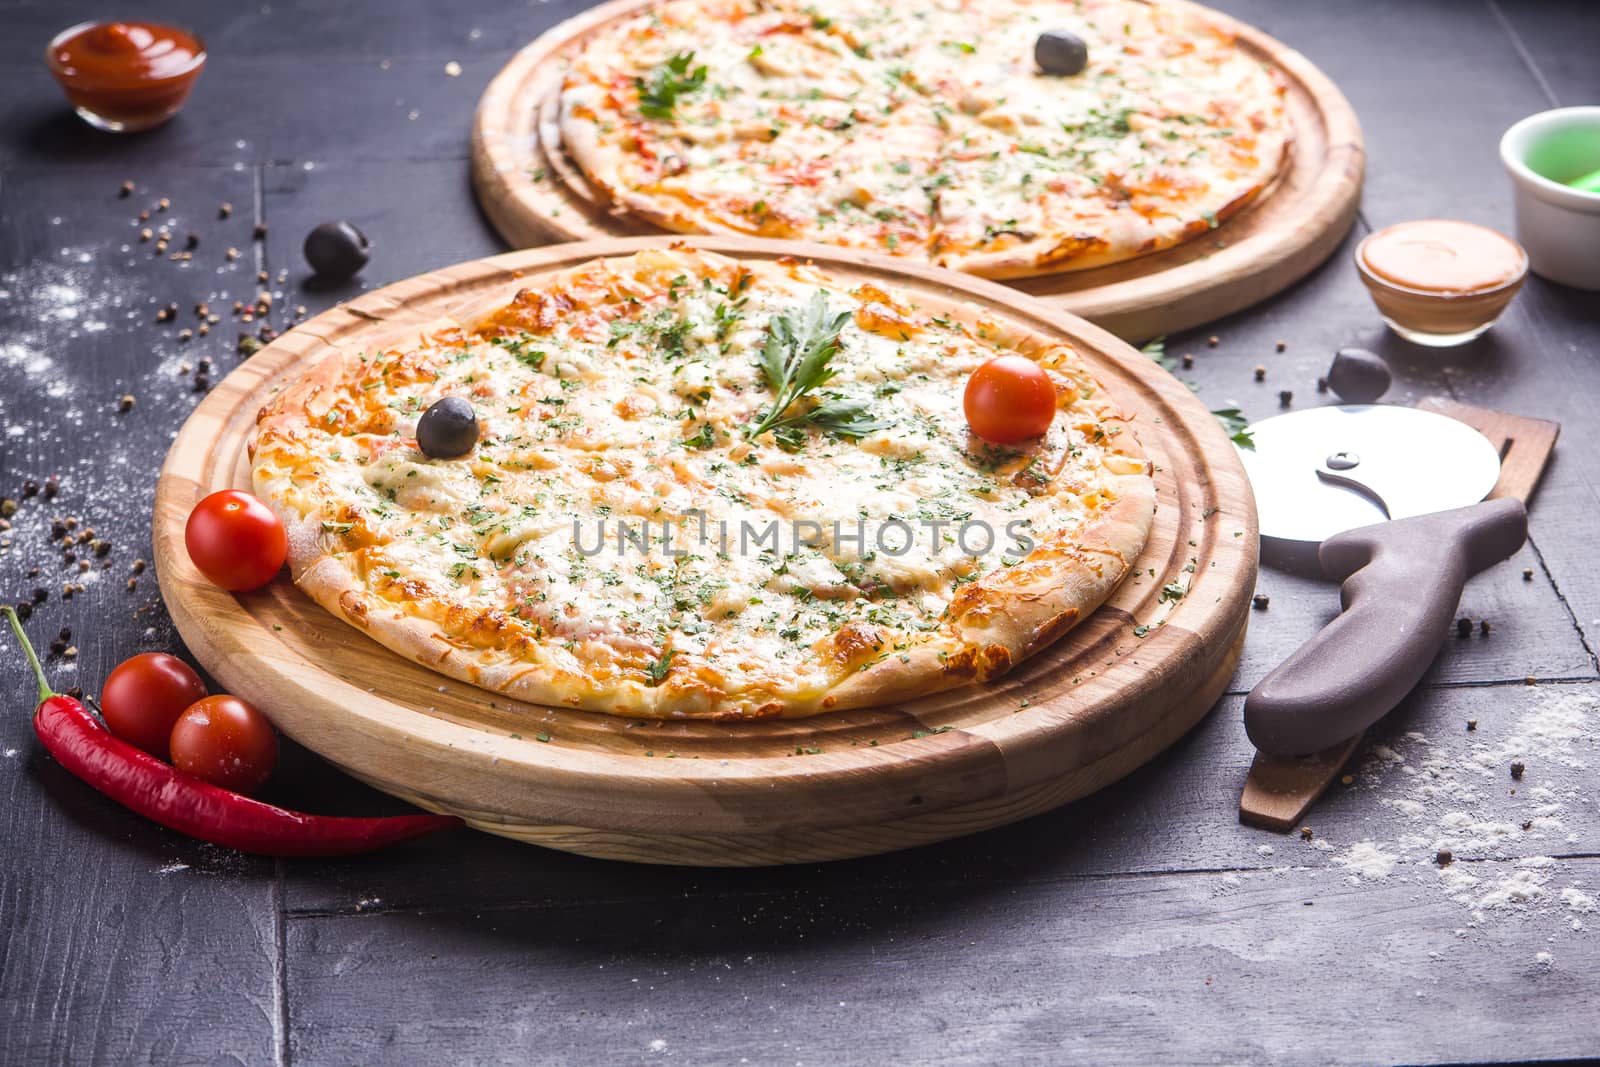 Concept: healthy food, diet. fast food. Fresh baked pizza on a wooden board with ingredients and cutlery around.